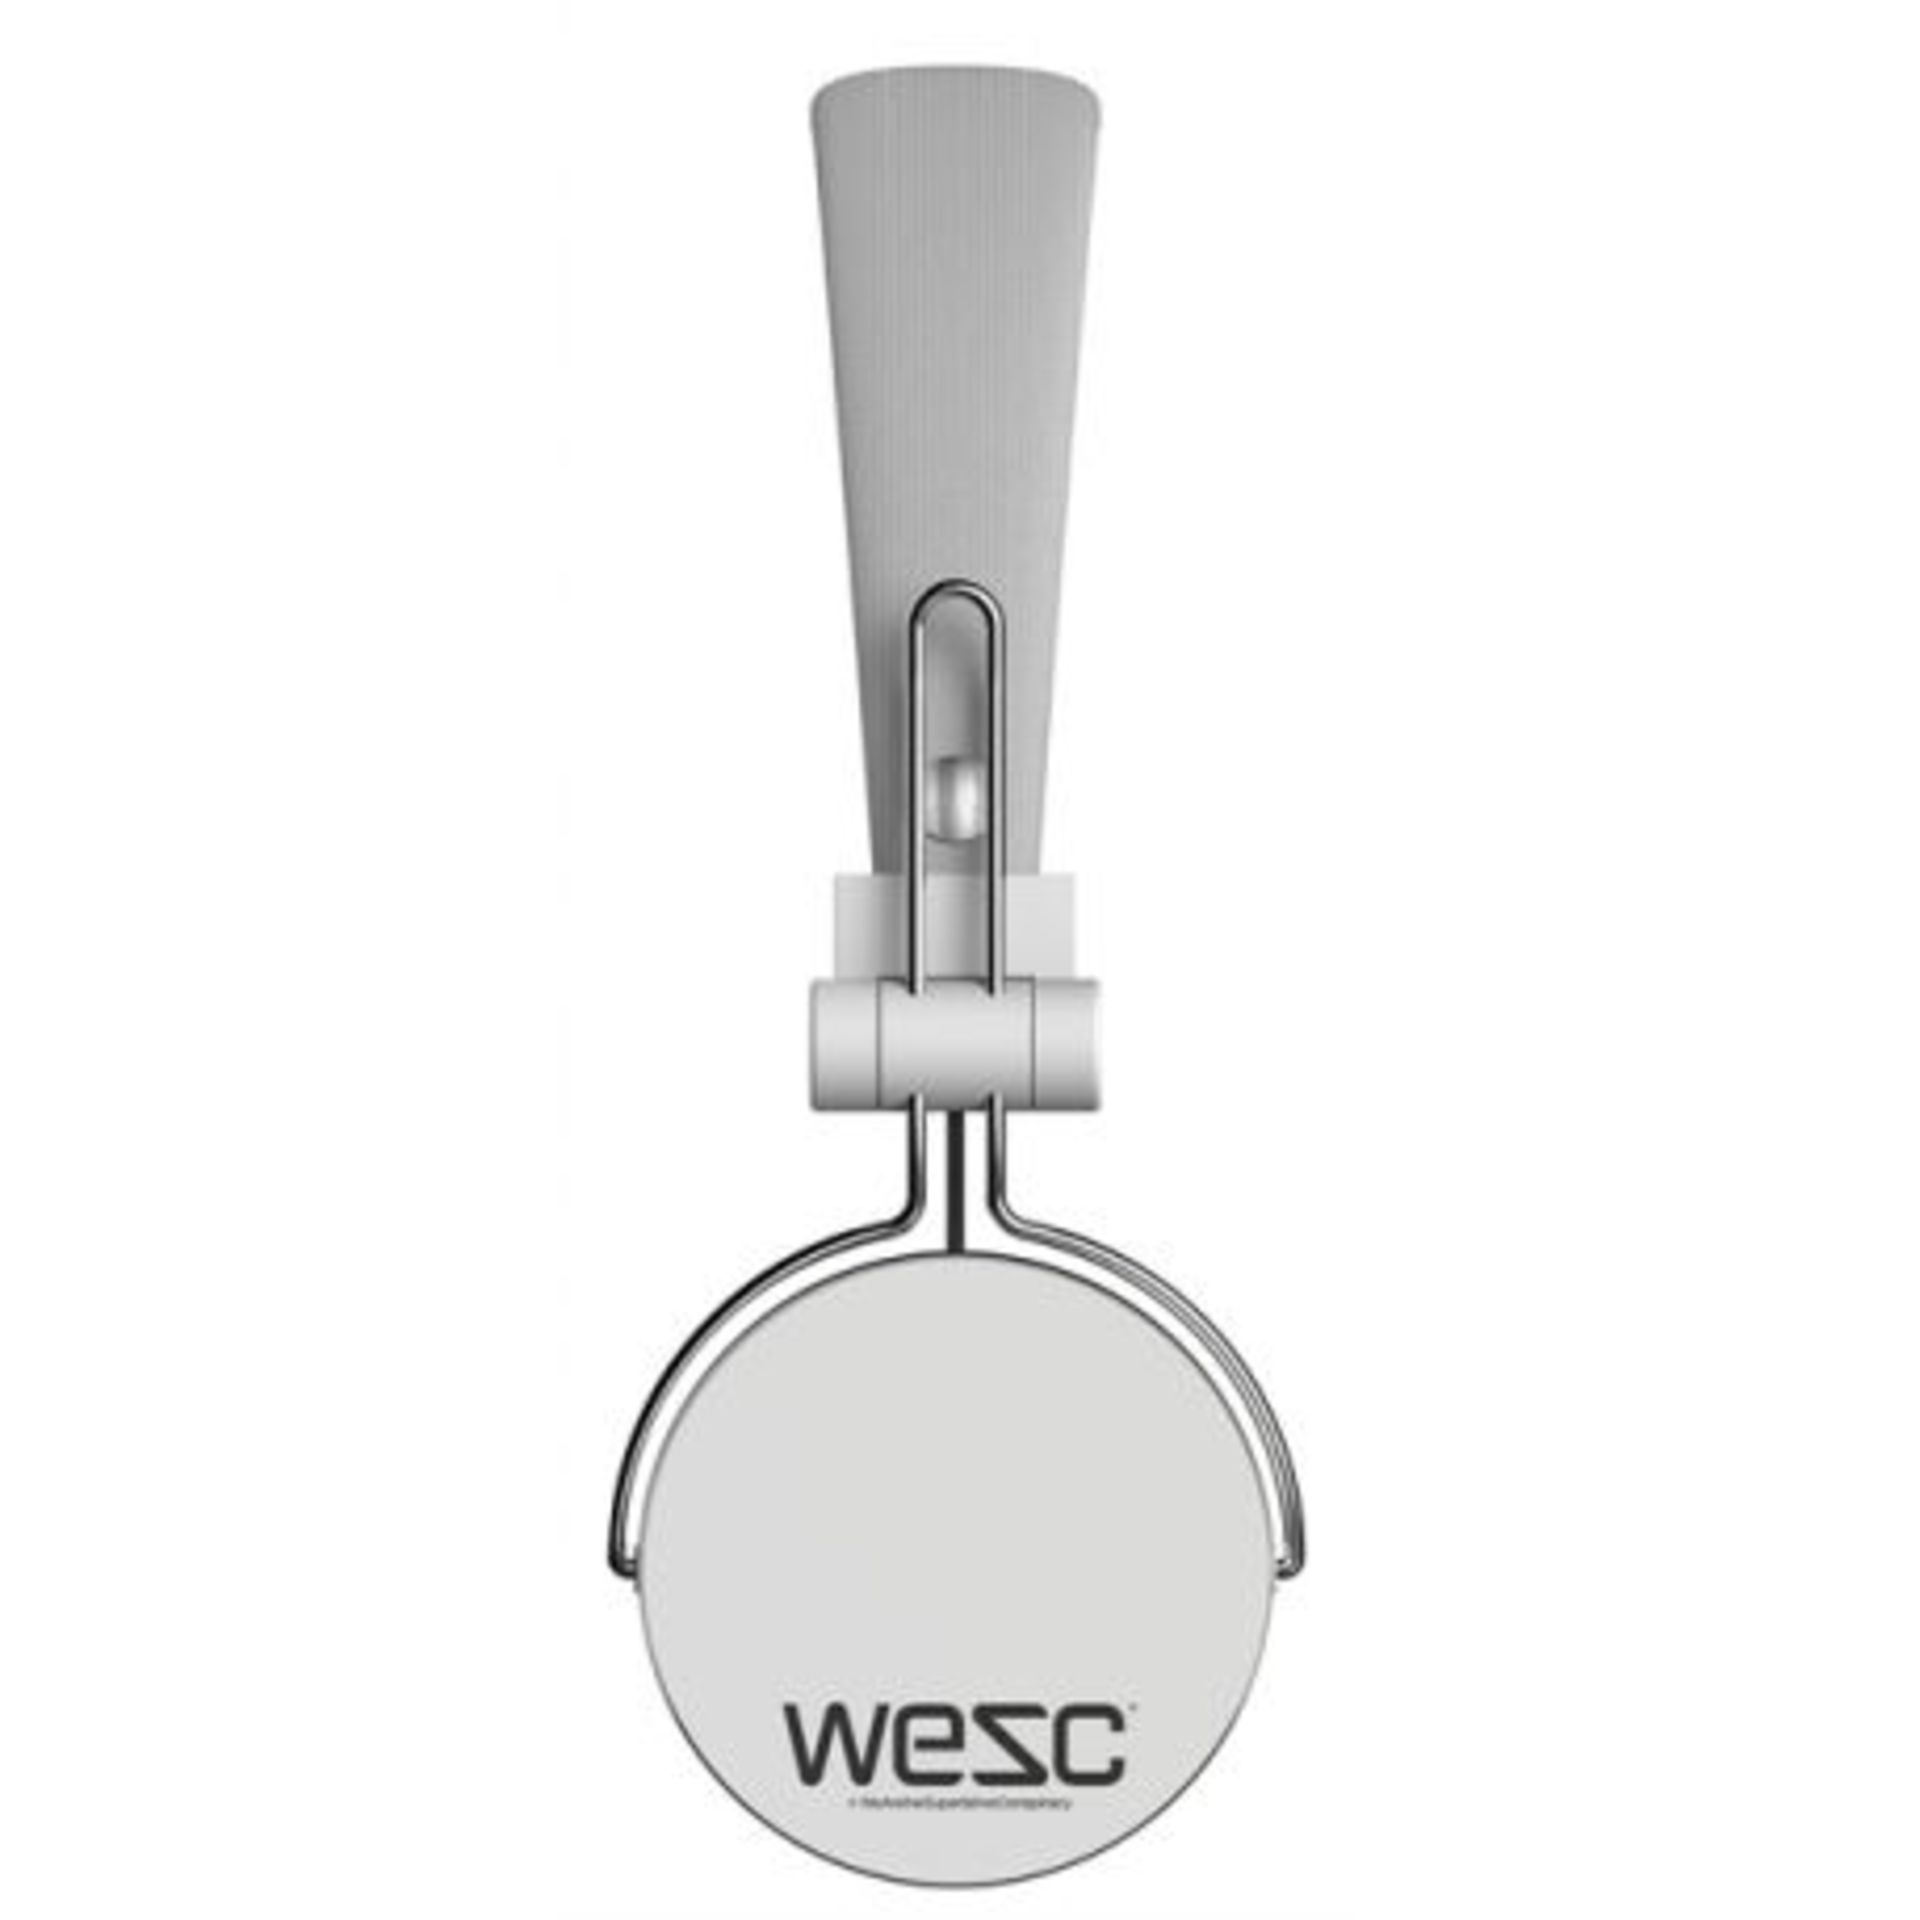 V Brand New WESC M30 On-Ear Wired Headphones - 40mm Power Drivers - 3.5mm Gold Plated Stereo